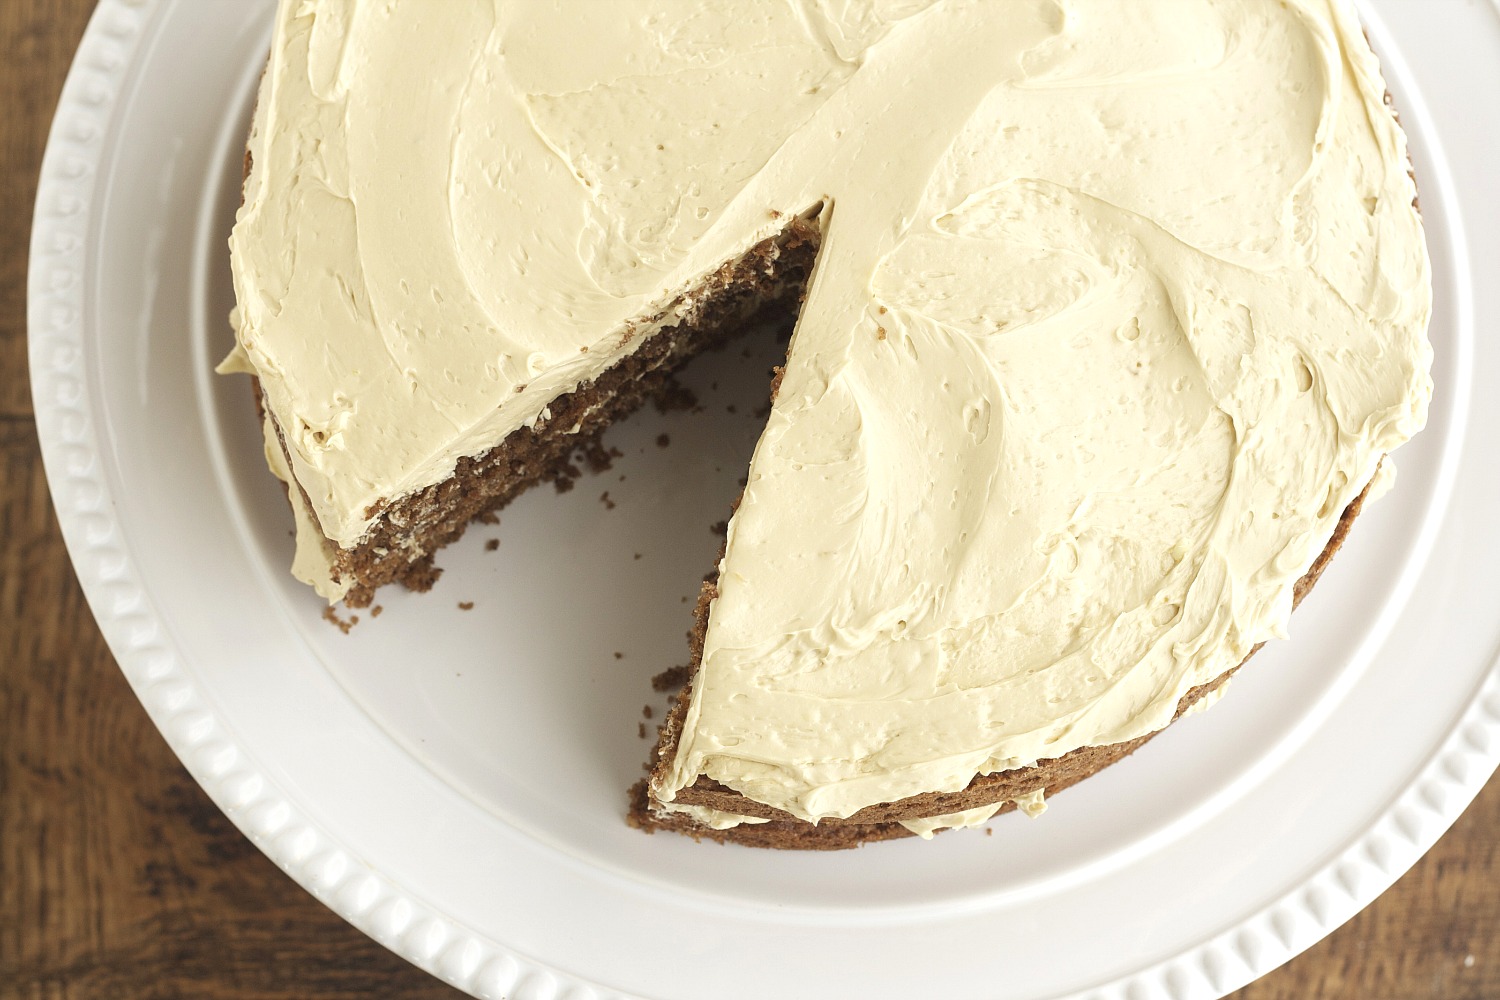 With this almond cake with maple buttercream, you really can have your cake and eat it too!